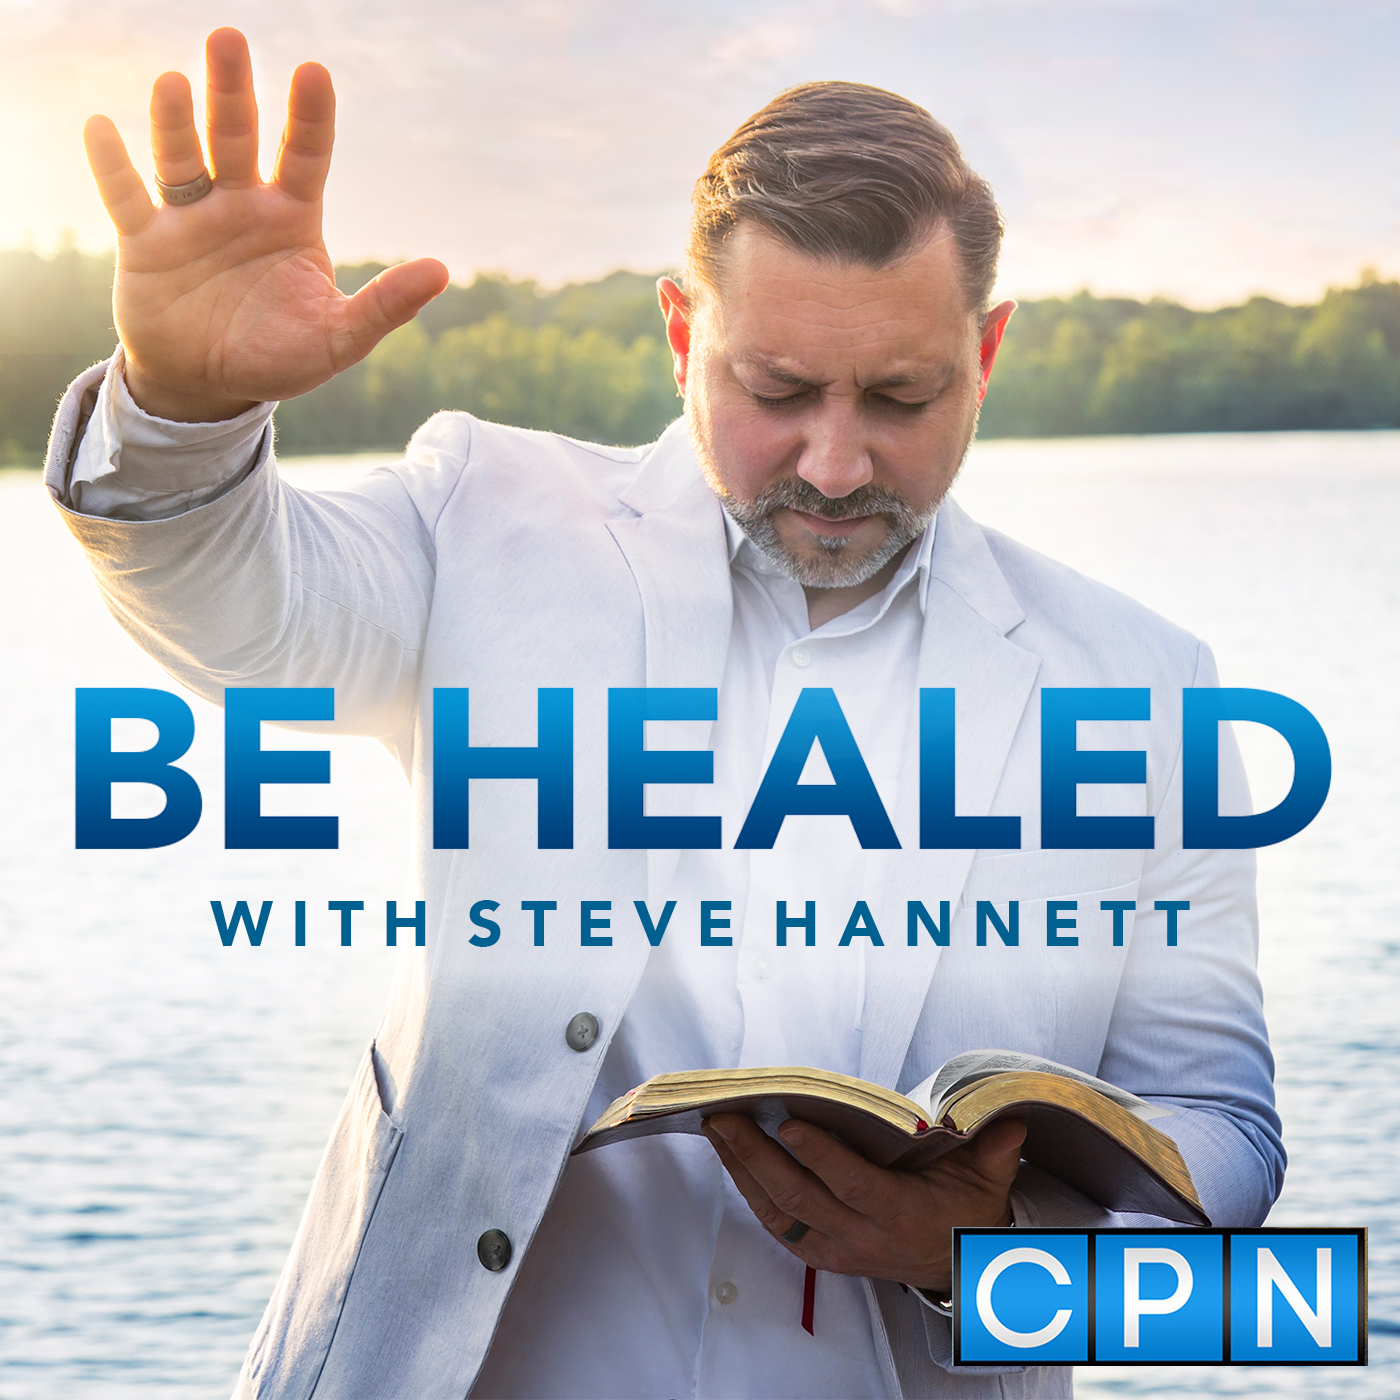 Why Forgiveness Provides Healing-Part 2  (Episode 45)